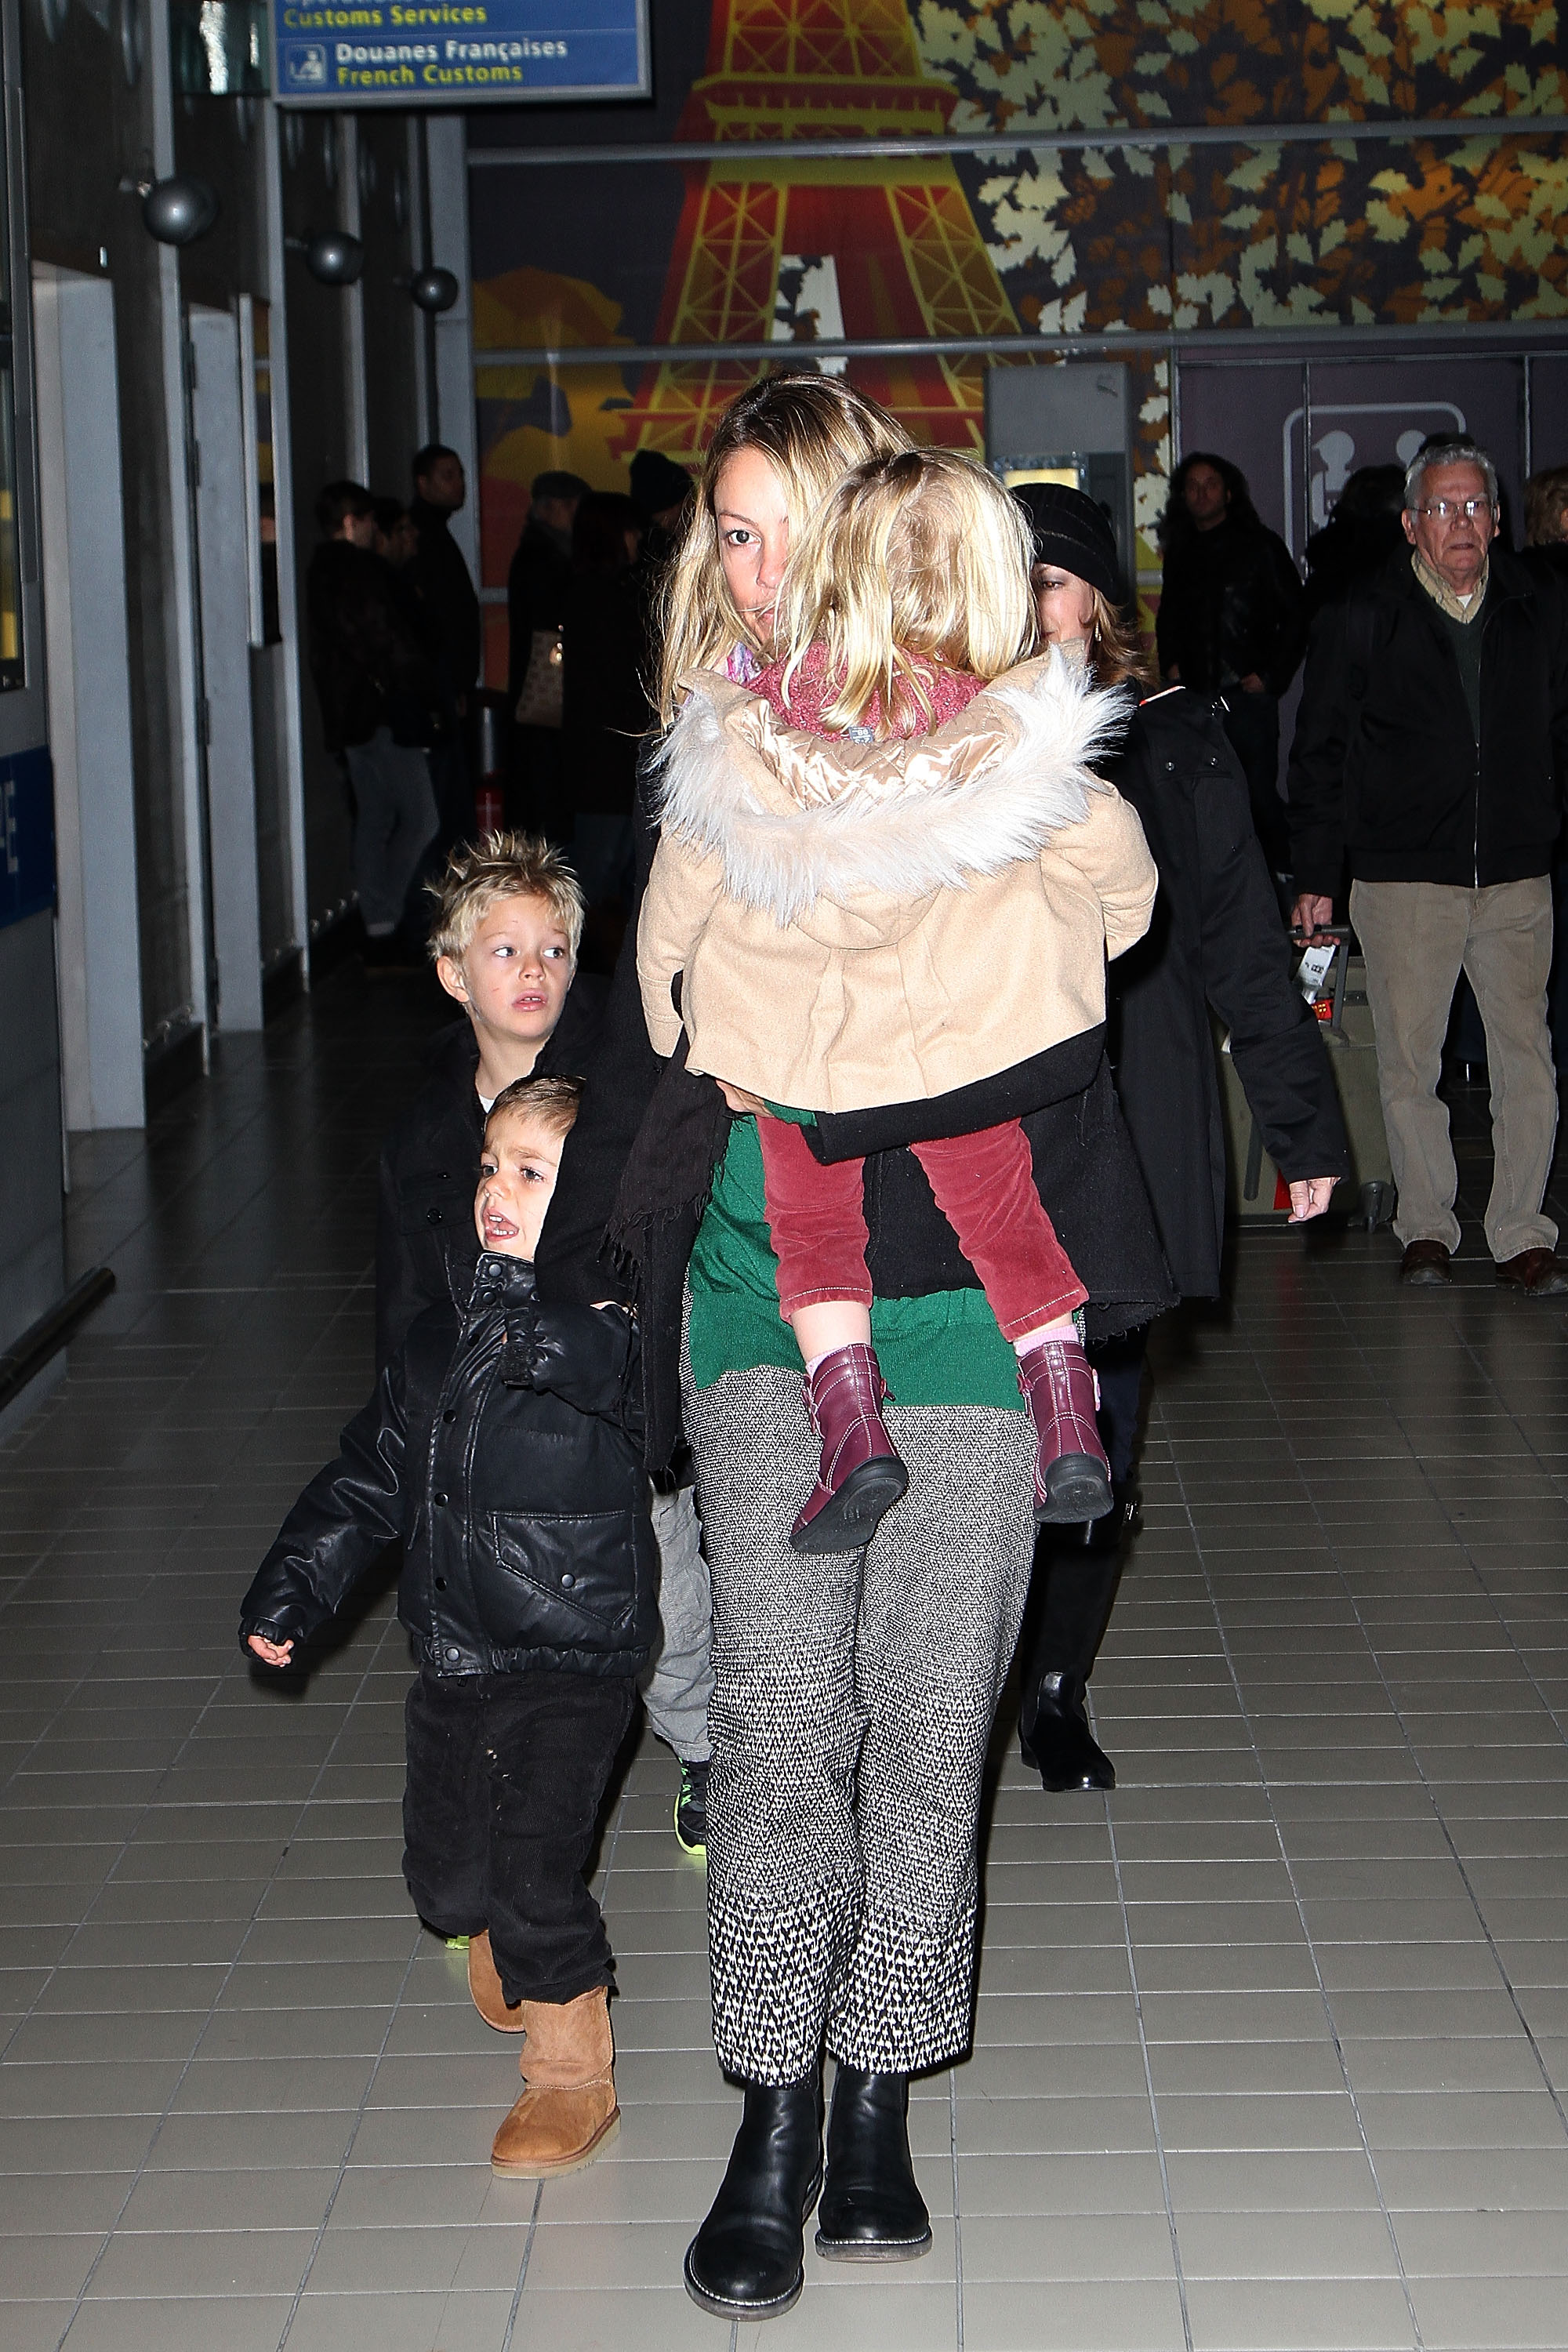 Christine Baumgartner, her sons Hayes and Cayden, and her daughter Grace Avery arrive at the Roissy airport on January 15, 2013 in Paris, France | Source: Getty Images